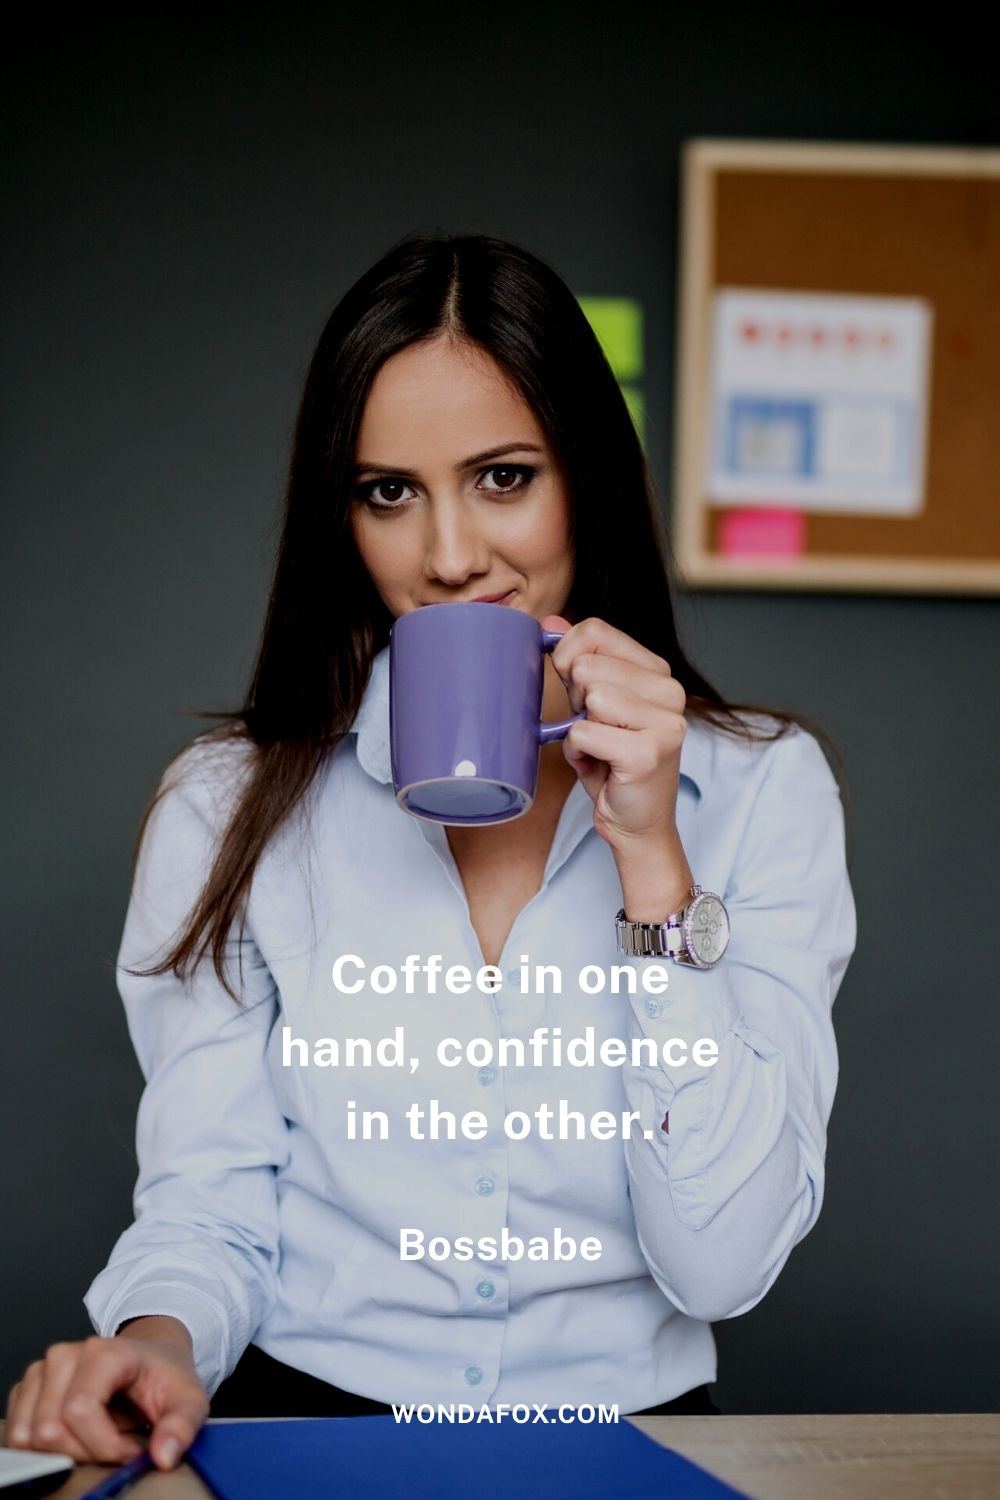 Coffee in one hand, confidence in the other.